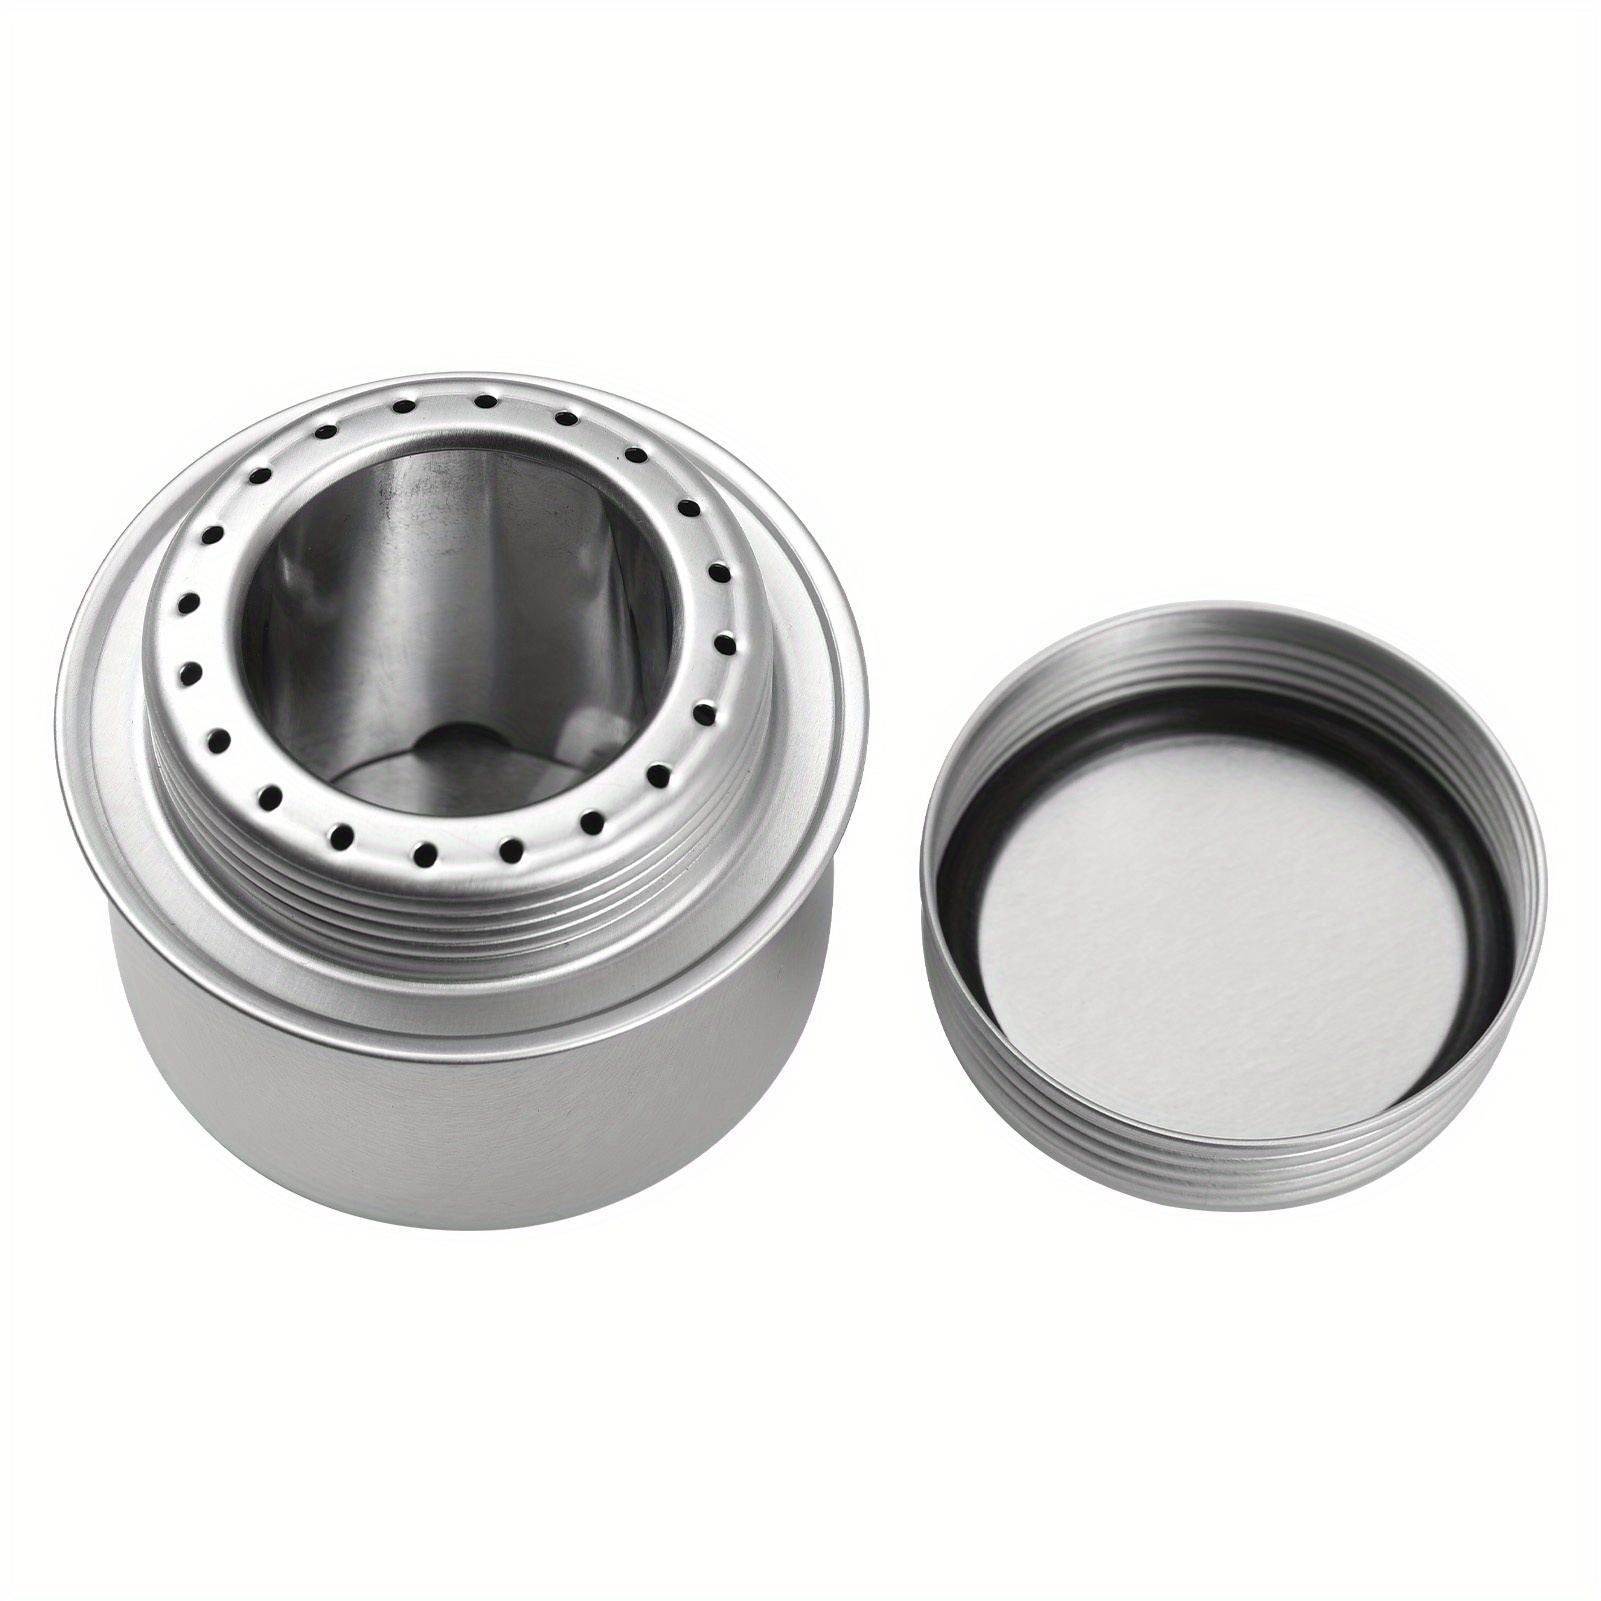 

1set, Portable Mini Aluminum Alloy Alcohol Stove With Lid, Camping Picnic Stoves For Baking Barbecue Picnic Outdoor, Kitchen Supplies, Kitchen Accessories, Bbq Accessories